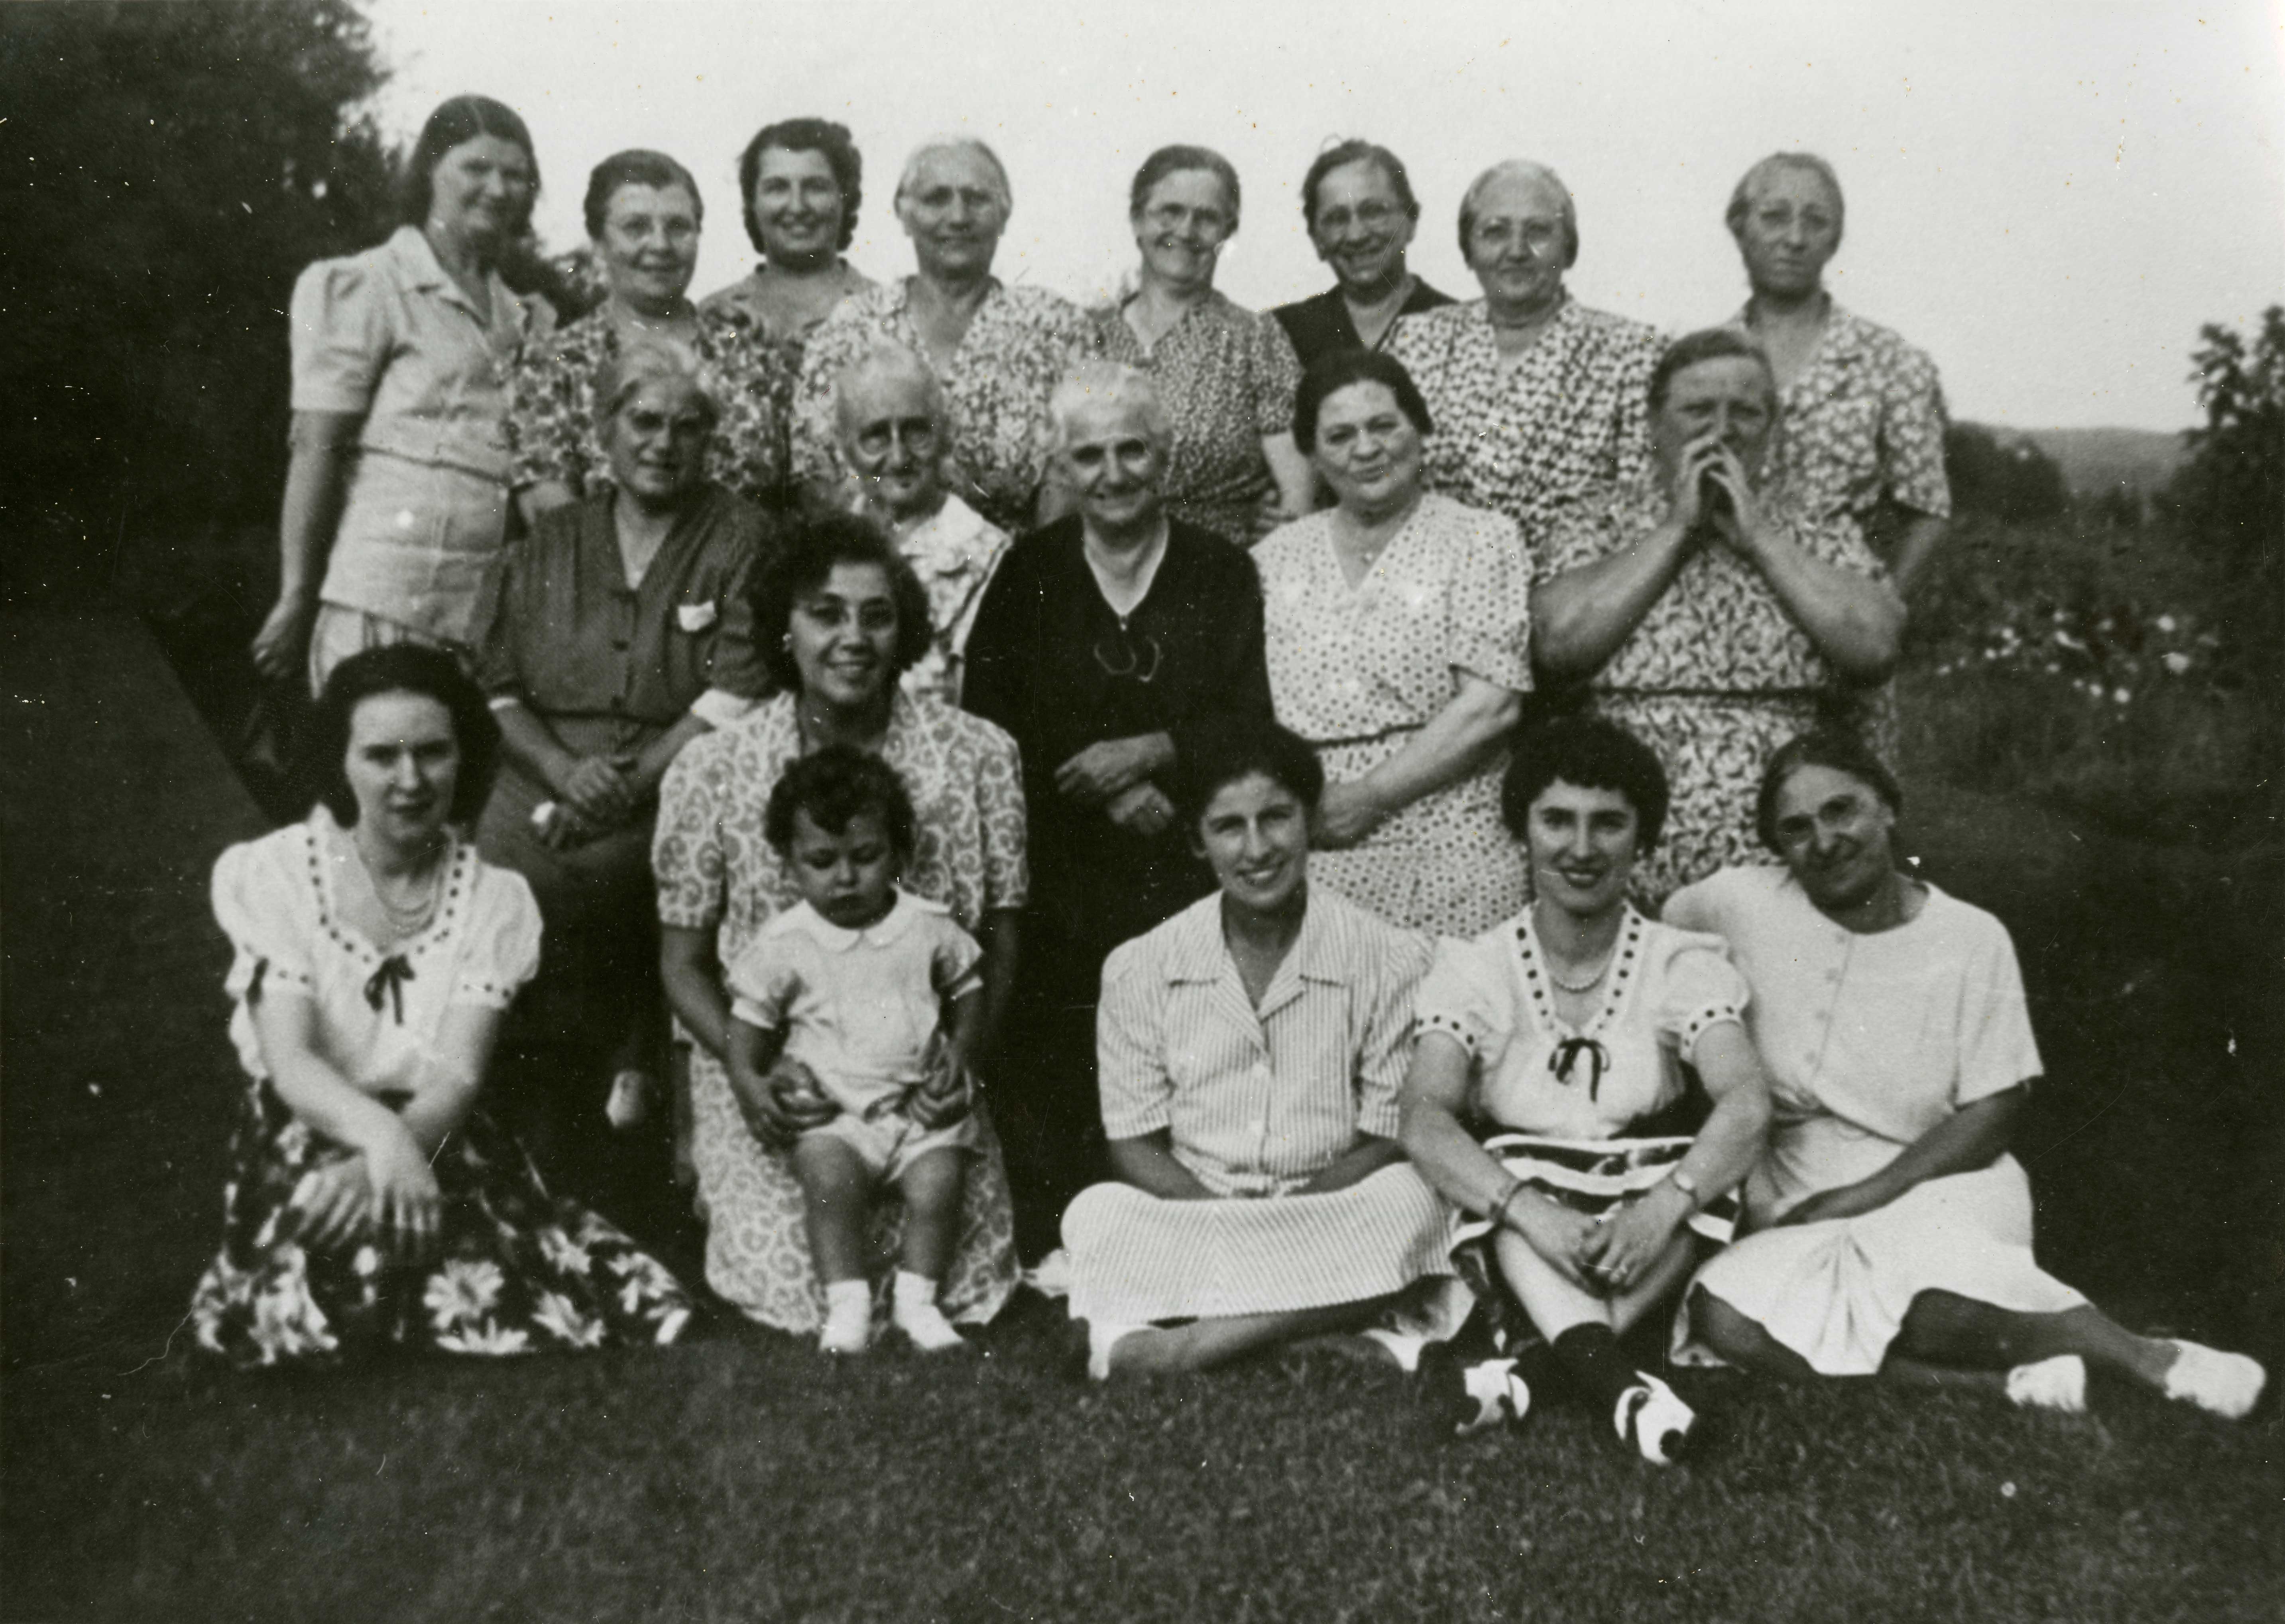 Lady's Picnic, ca. 1920s, from the Peoples of Connecticut Project Records